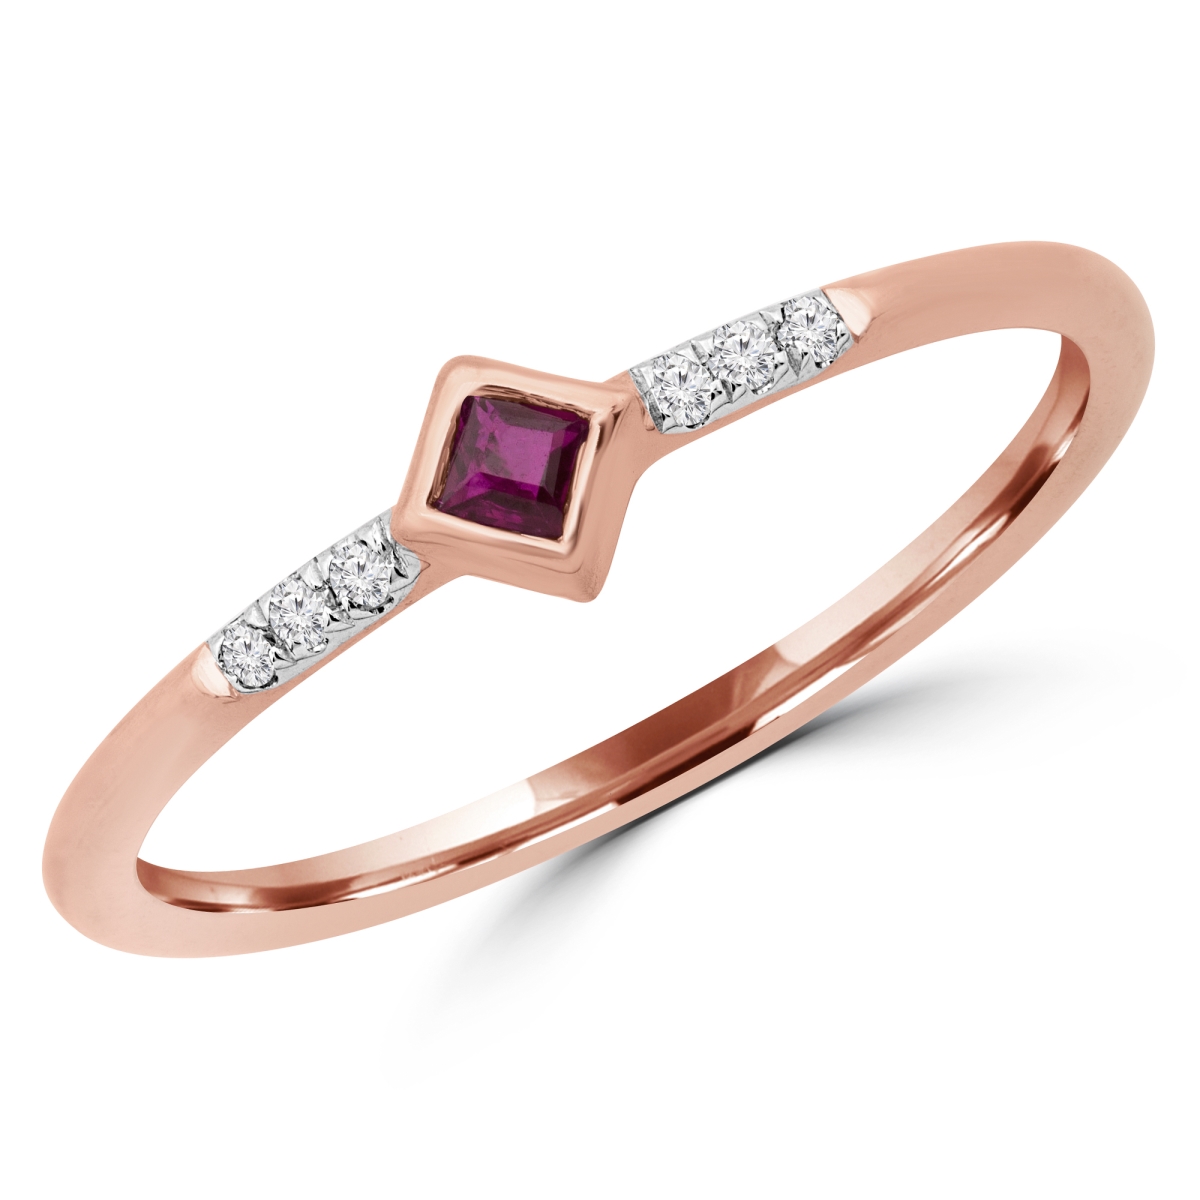 Picture of Majesty Diamonds MDR190078-7 0.1 CTW Round Red Ruby Bezel Set Cocktail Ring in 14K Rose Gold - Size 7